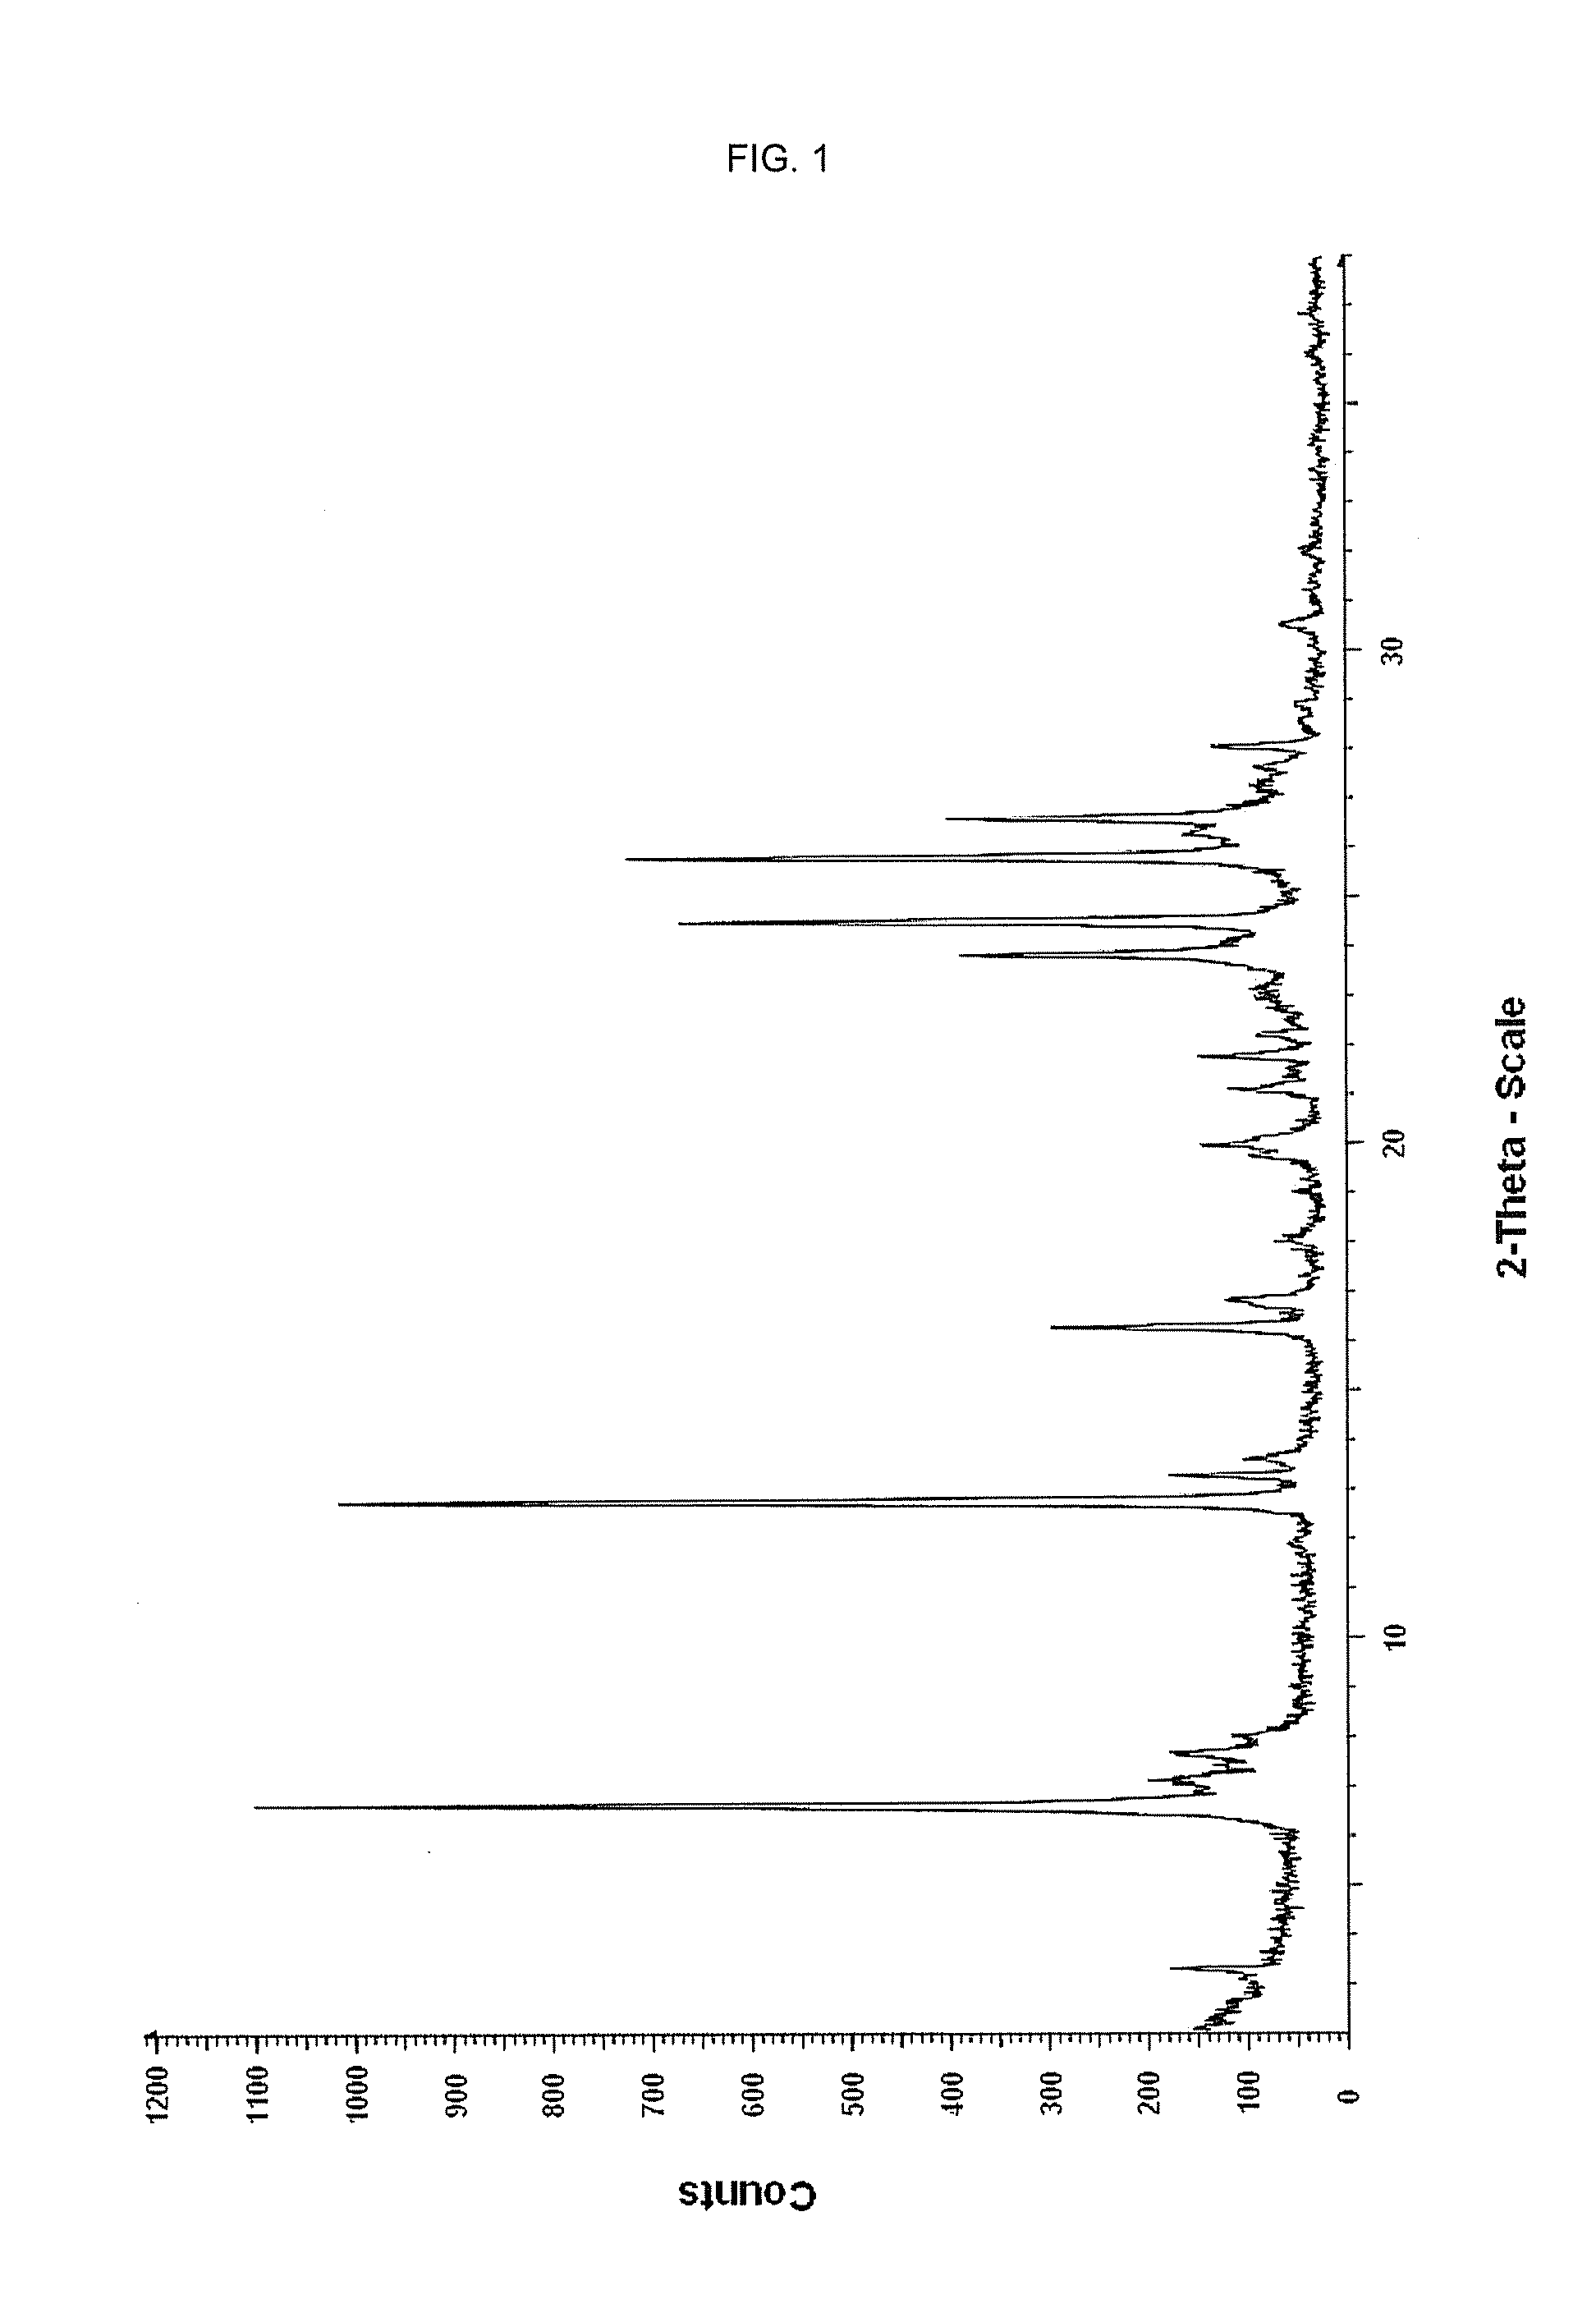 Polymorphs of an Active Pharmaceutical Ingredient